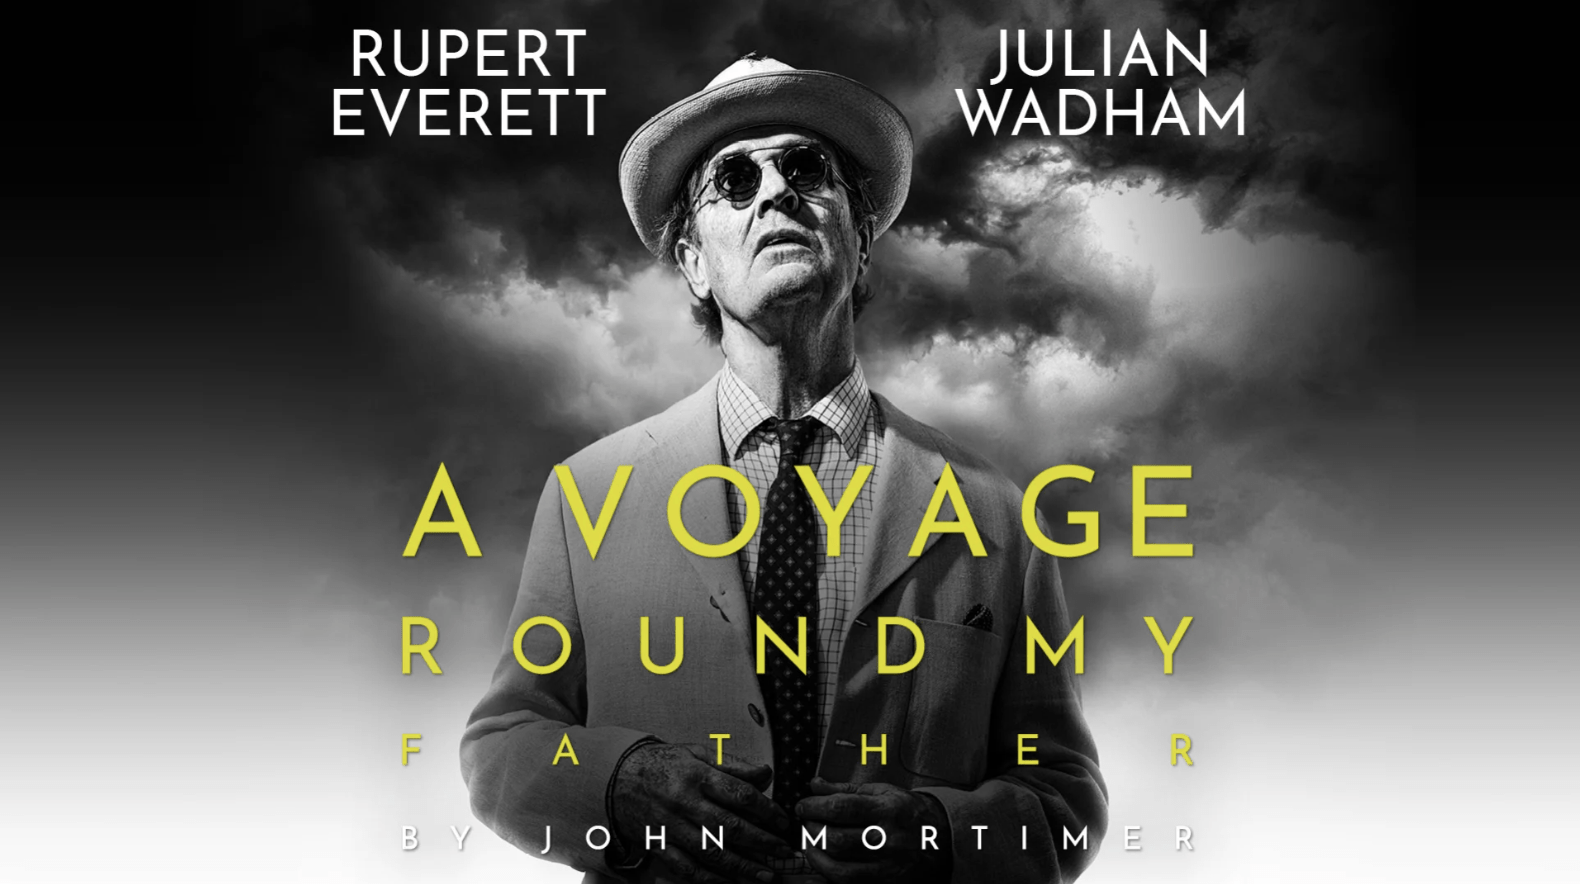 BAFTA and Golden Globe nominee Rupert Everett will star in John Mortimer’s celebrated autobiographical play A Voyage Round My Father.